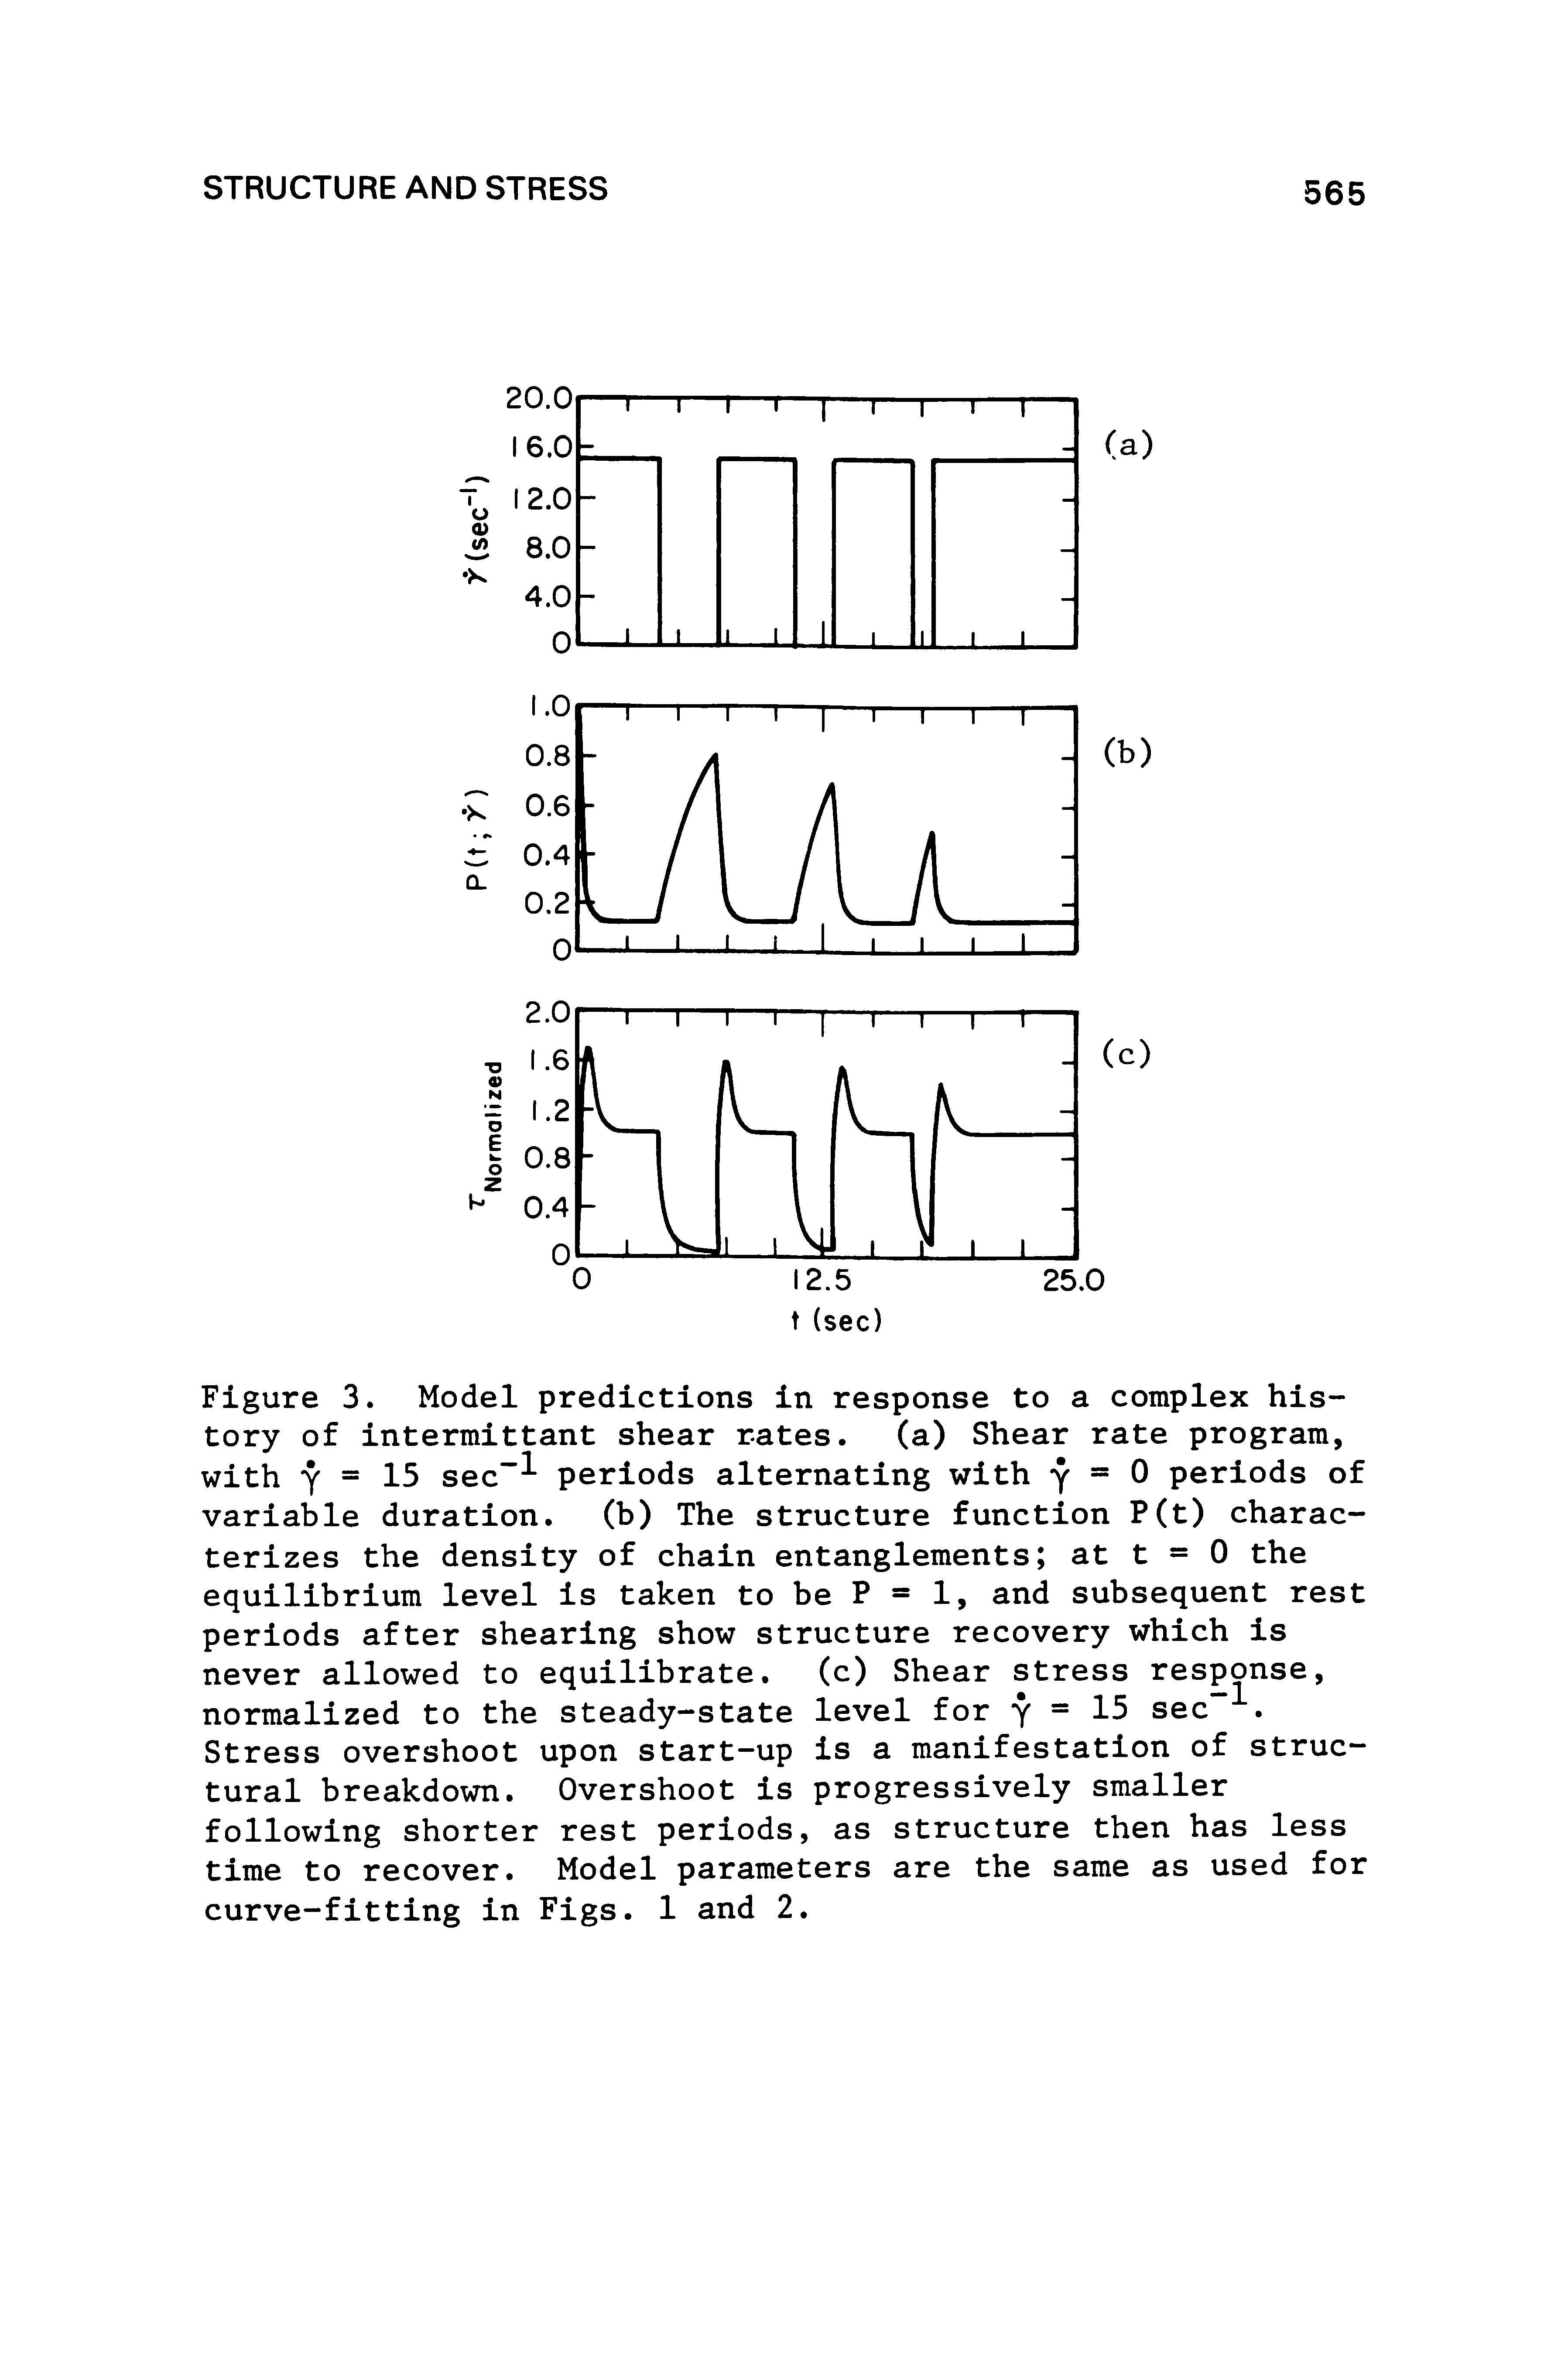 Figure 3. Model predictions in response to a complex history of intermittent shear rates. (a) Shear rate program, with Y = 15 sec periods alternating with y = 0 periods of variable duration. (b) The structure function P(t) characterizes the density of chain entanglements at t = 0 the equilibrium level is taken to be P = 1, and subsequent rest periods after shearing show structure recovery which is never allowed to equilibrate. (c) Shear stress response, normalized to the steady-state level for y = 15 sec . Stress overshoot upon start-up is a manifestation of structural breakdown. Overshoot is progressively smaller following shorter rest periods, as structure then has less time to recover. Model parameters are the same as used for curve-fitting in Figs. 1 and 2.